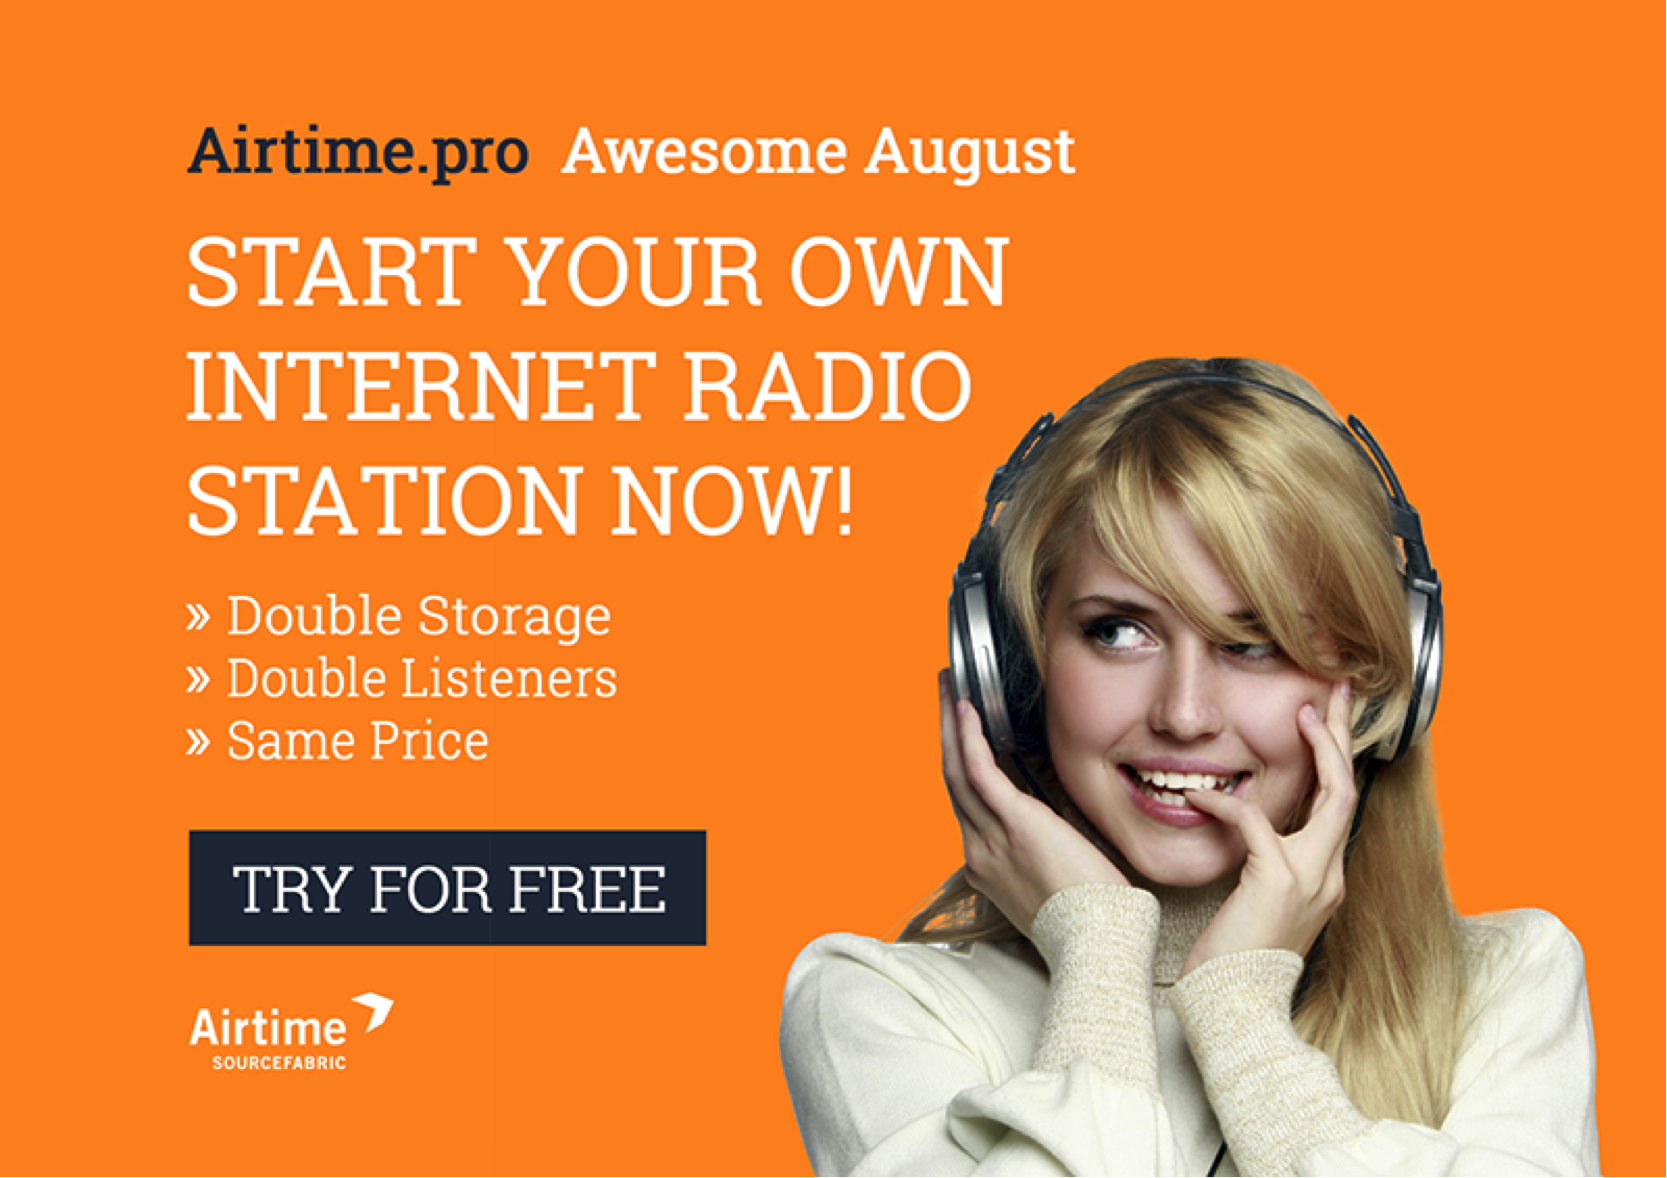 Start Your Own Internet Radio Station with Airtime Pro